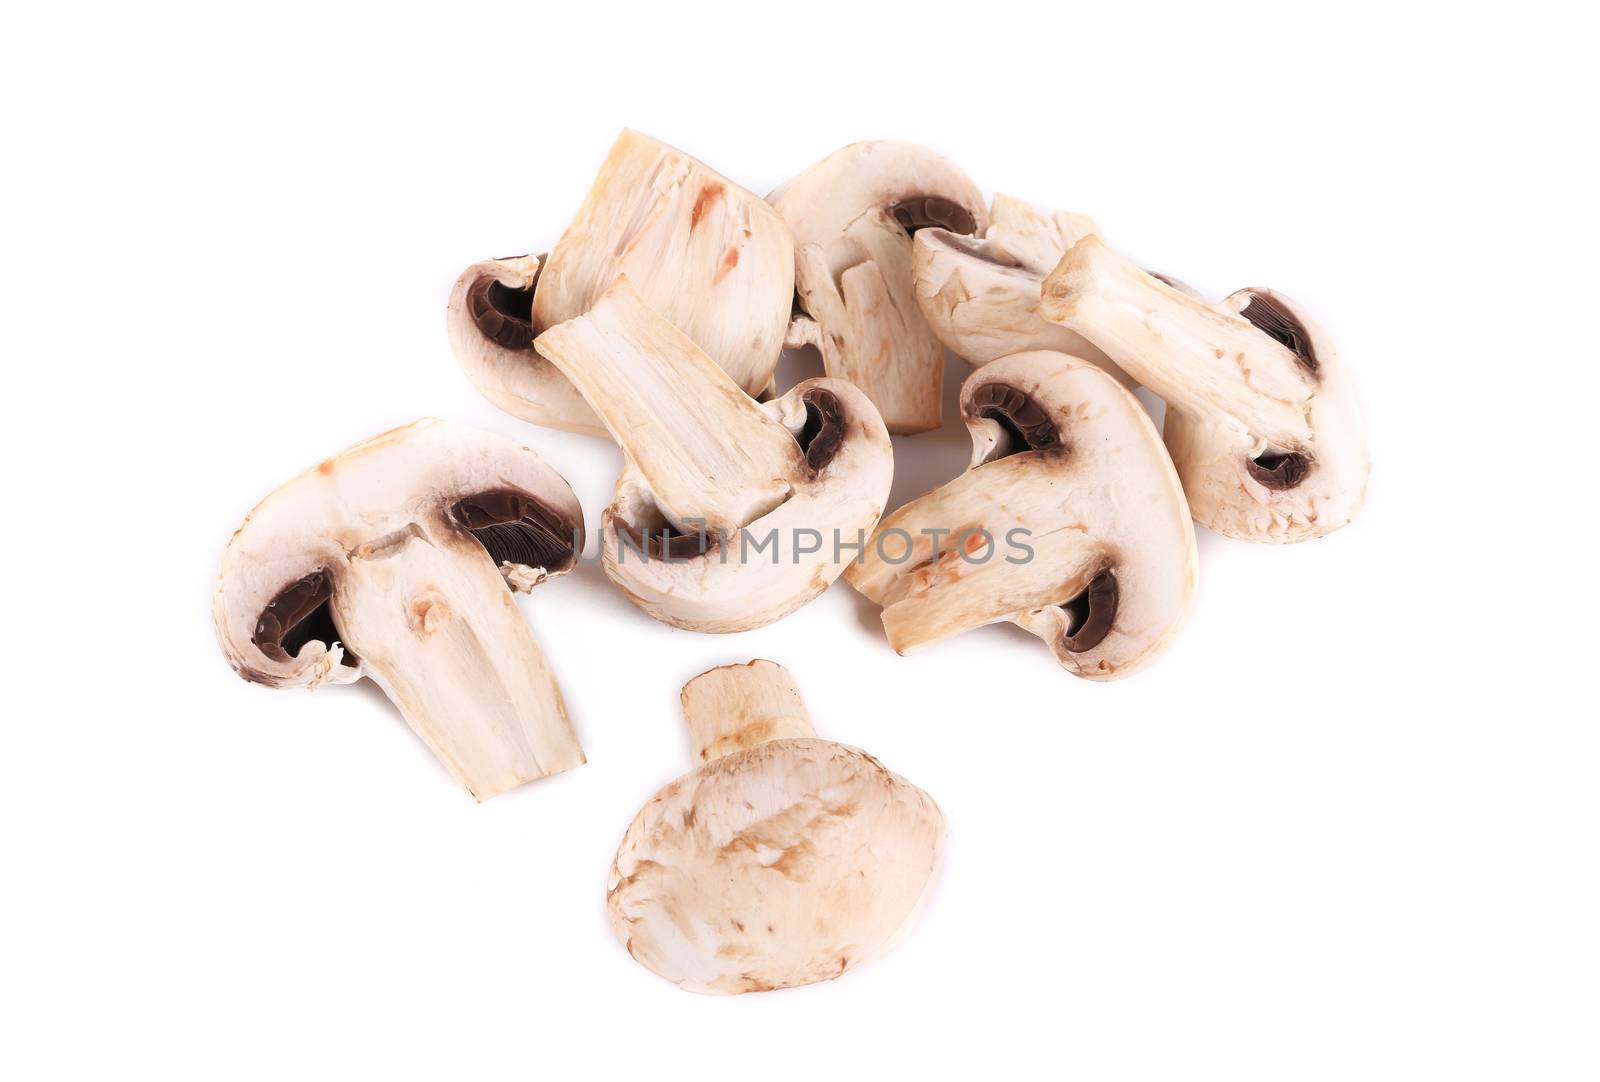 Sliced champignons. Isolated on a white background.